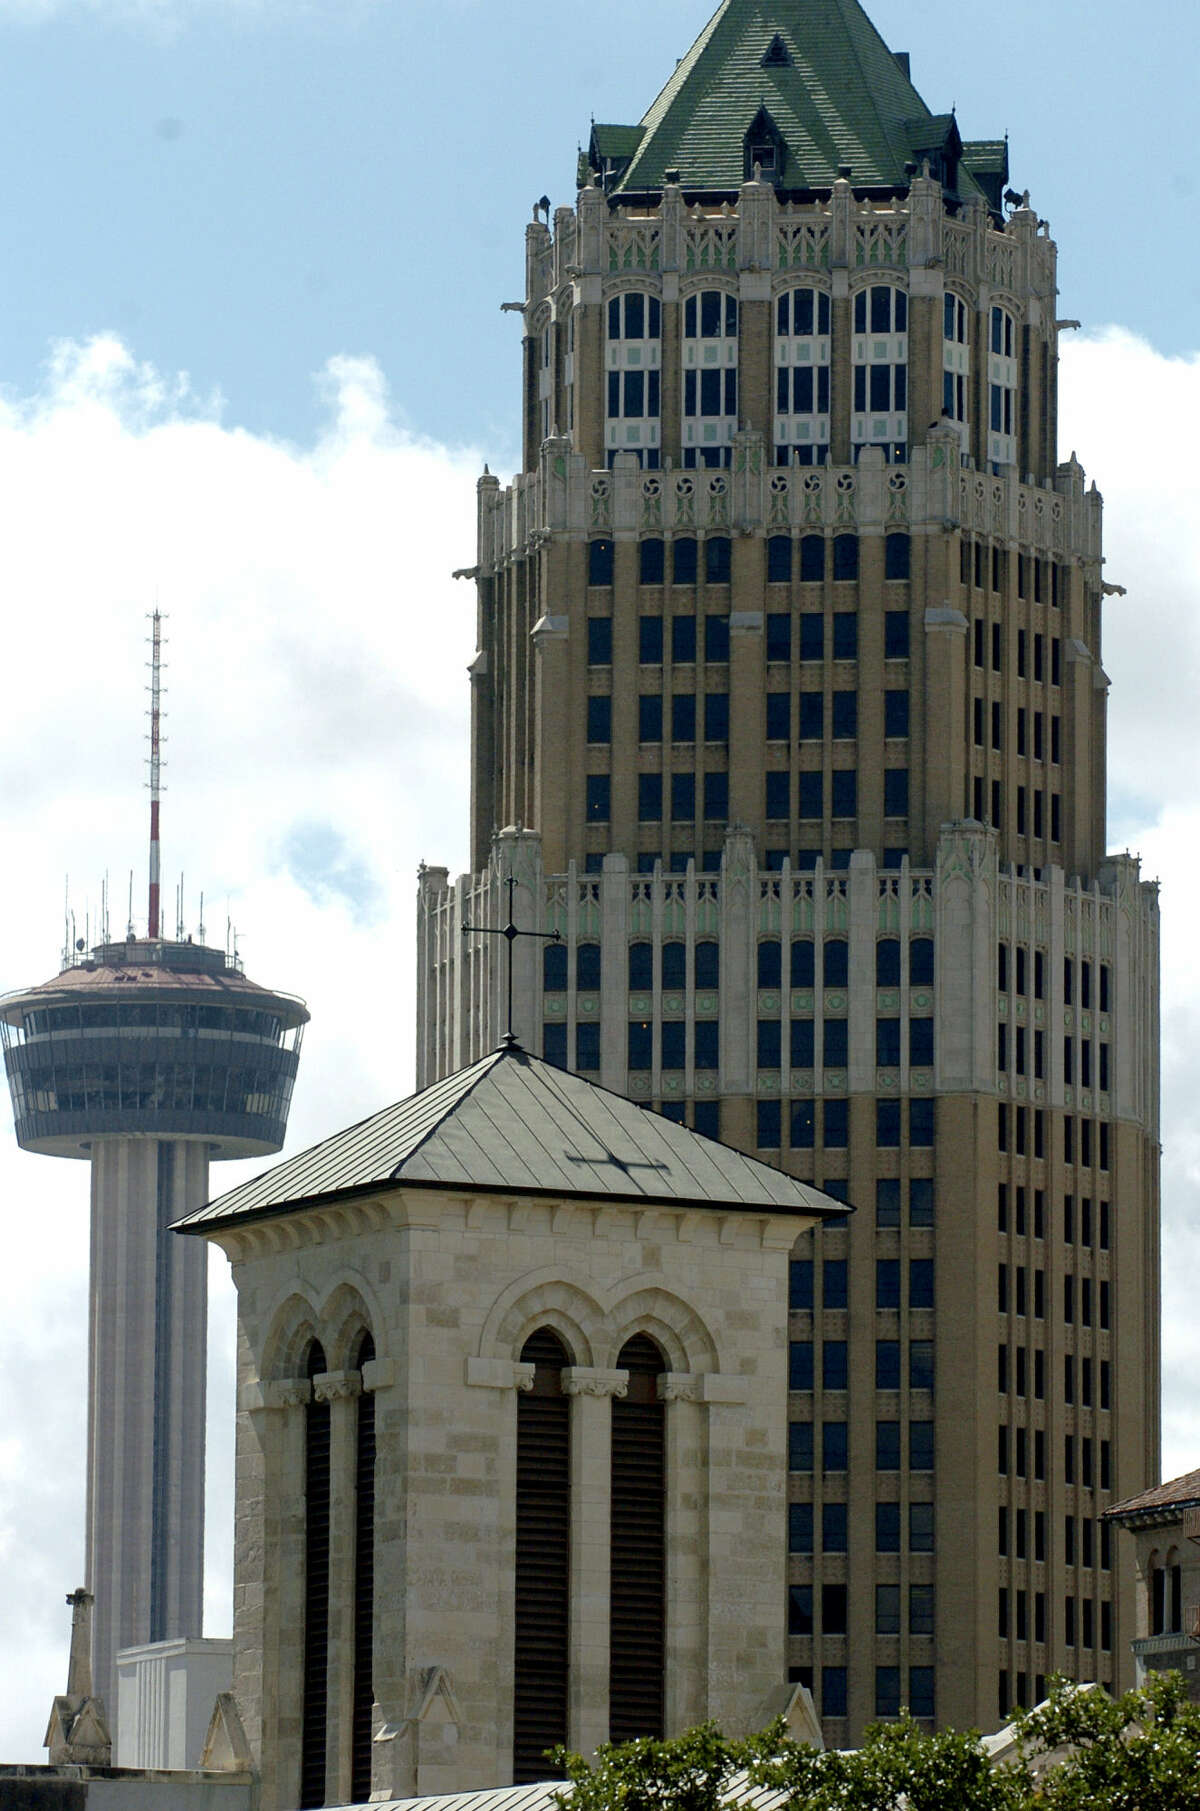 Architecture in San Antonio — San Fernando Cathedral (foreground), the Tower Life building (right) and the Tower of the Americas.